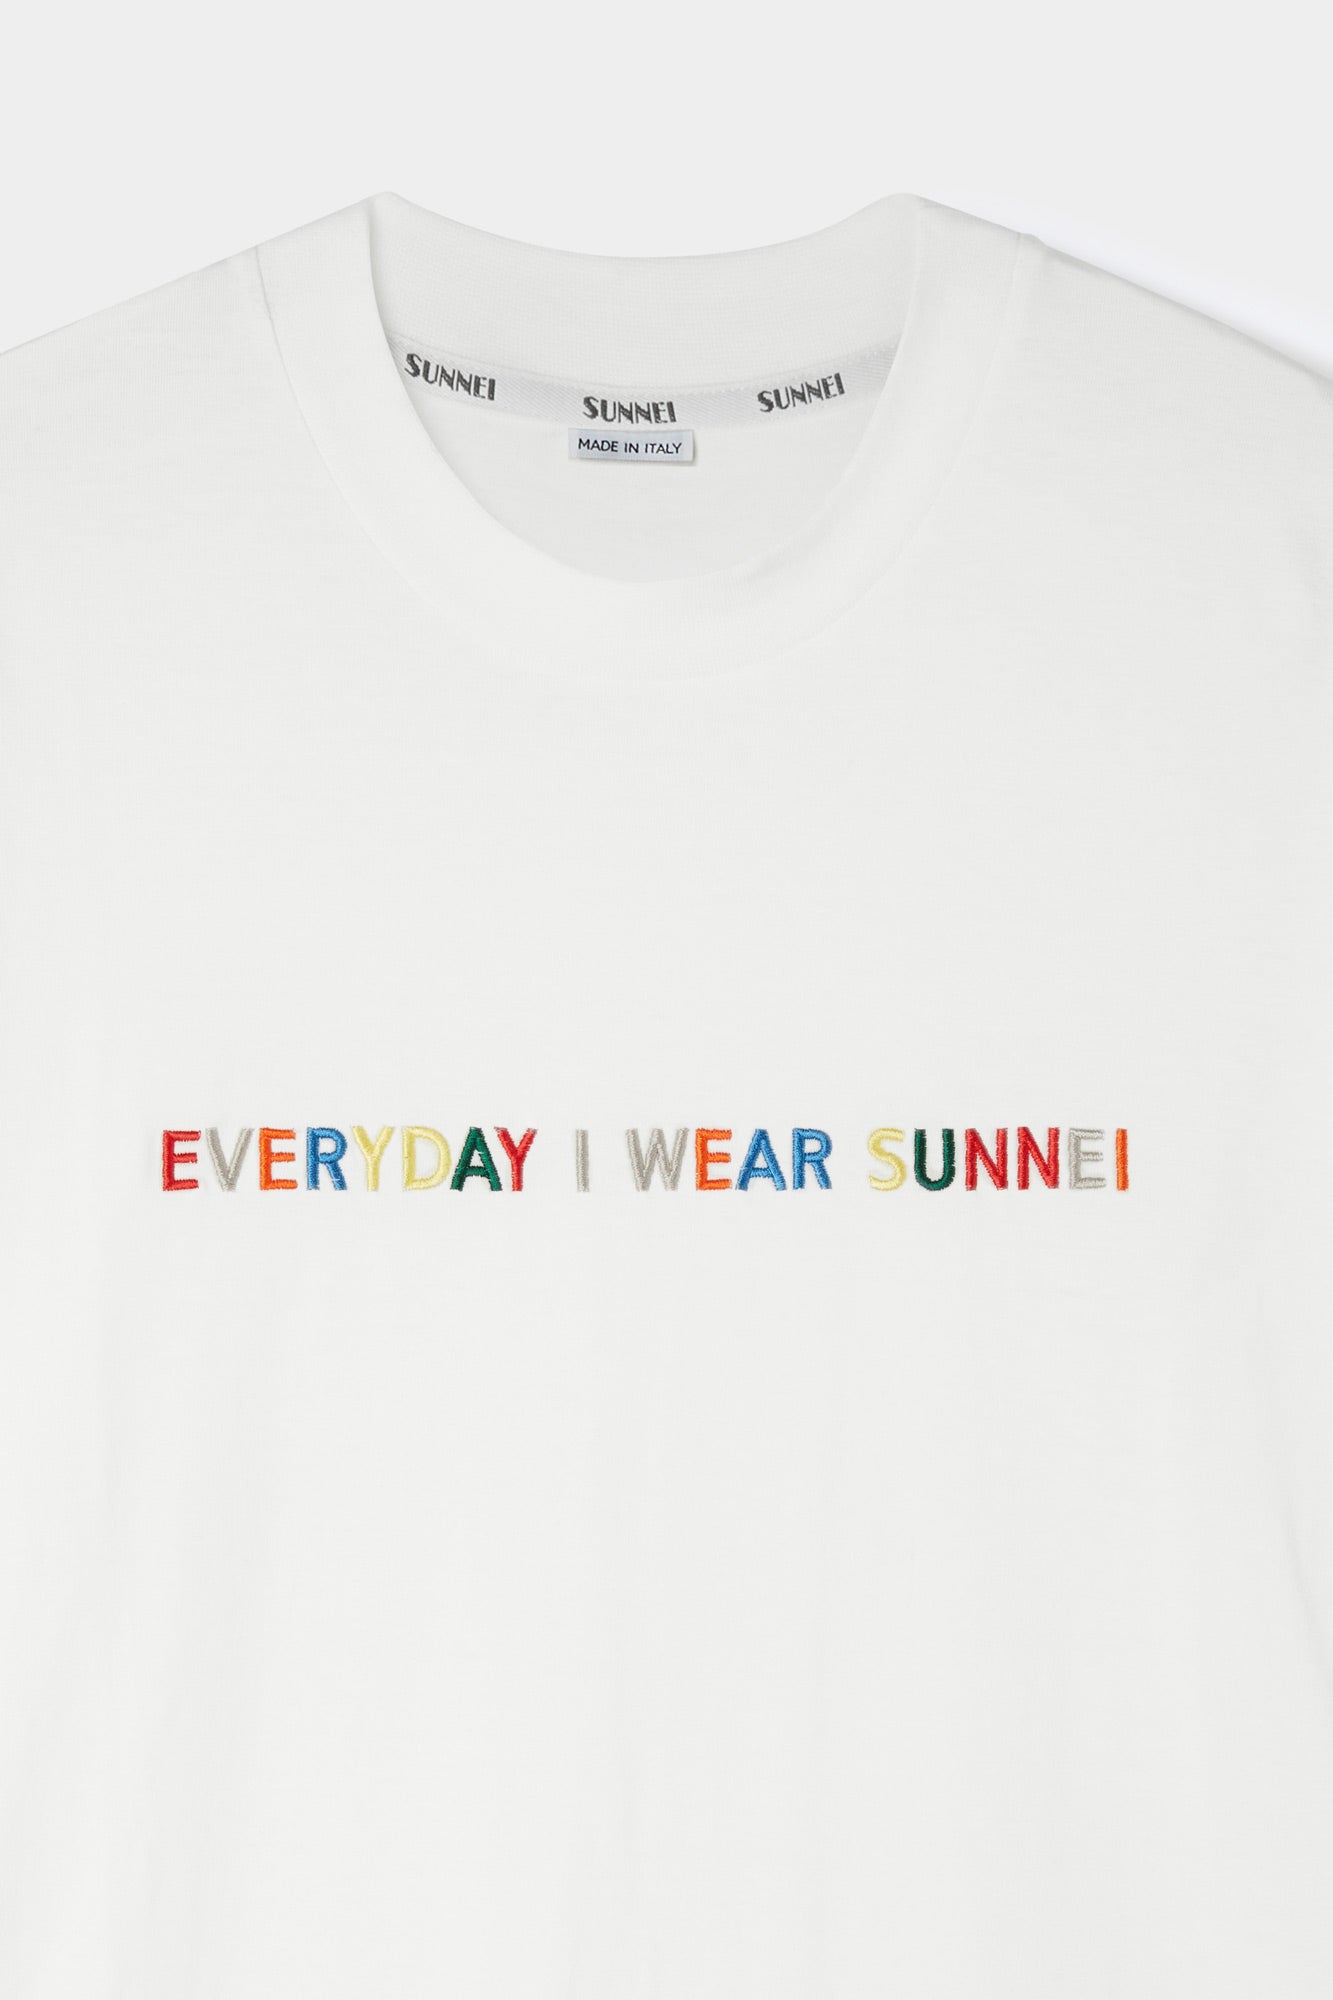 'EVERYDAY I WEAR SUNNEI' T-SHIRT / white / multicolor embroidery